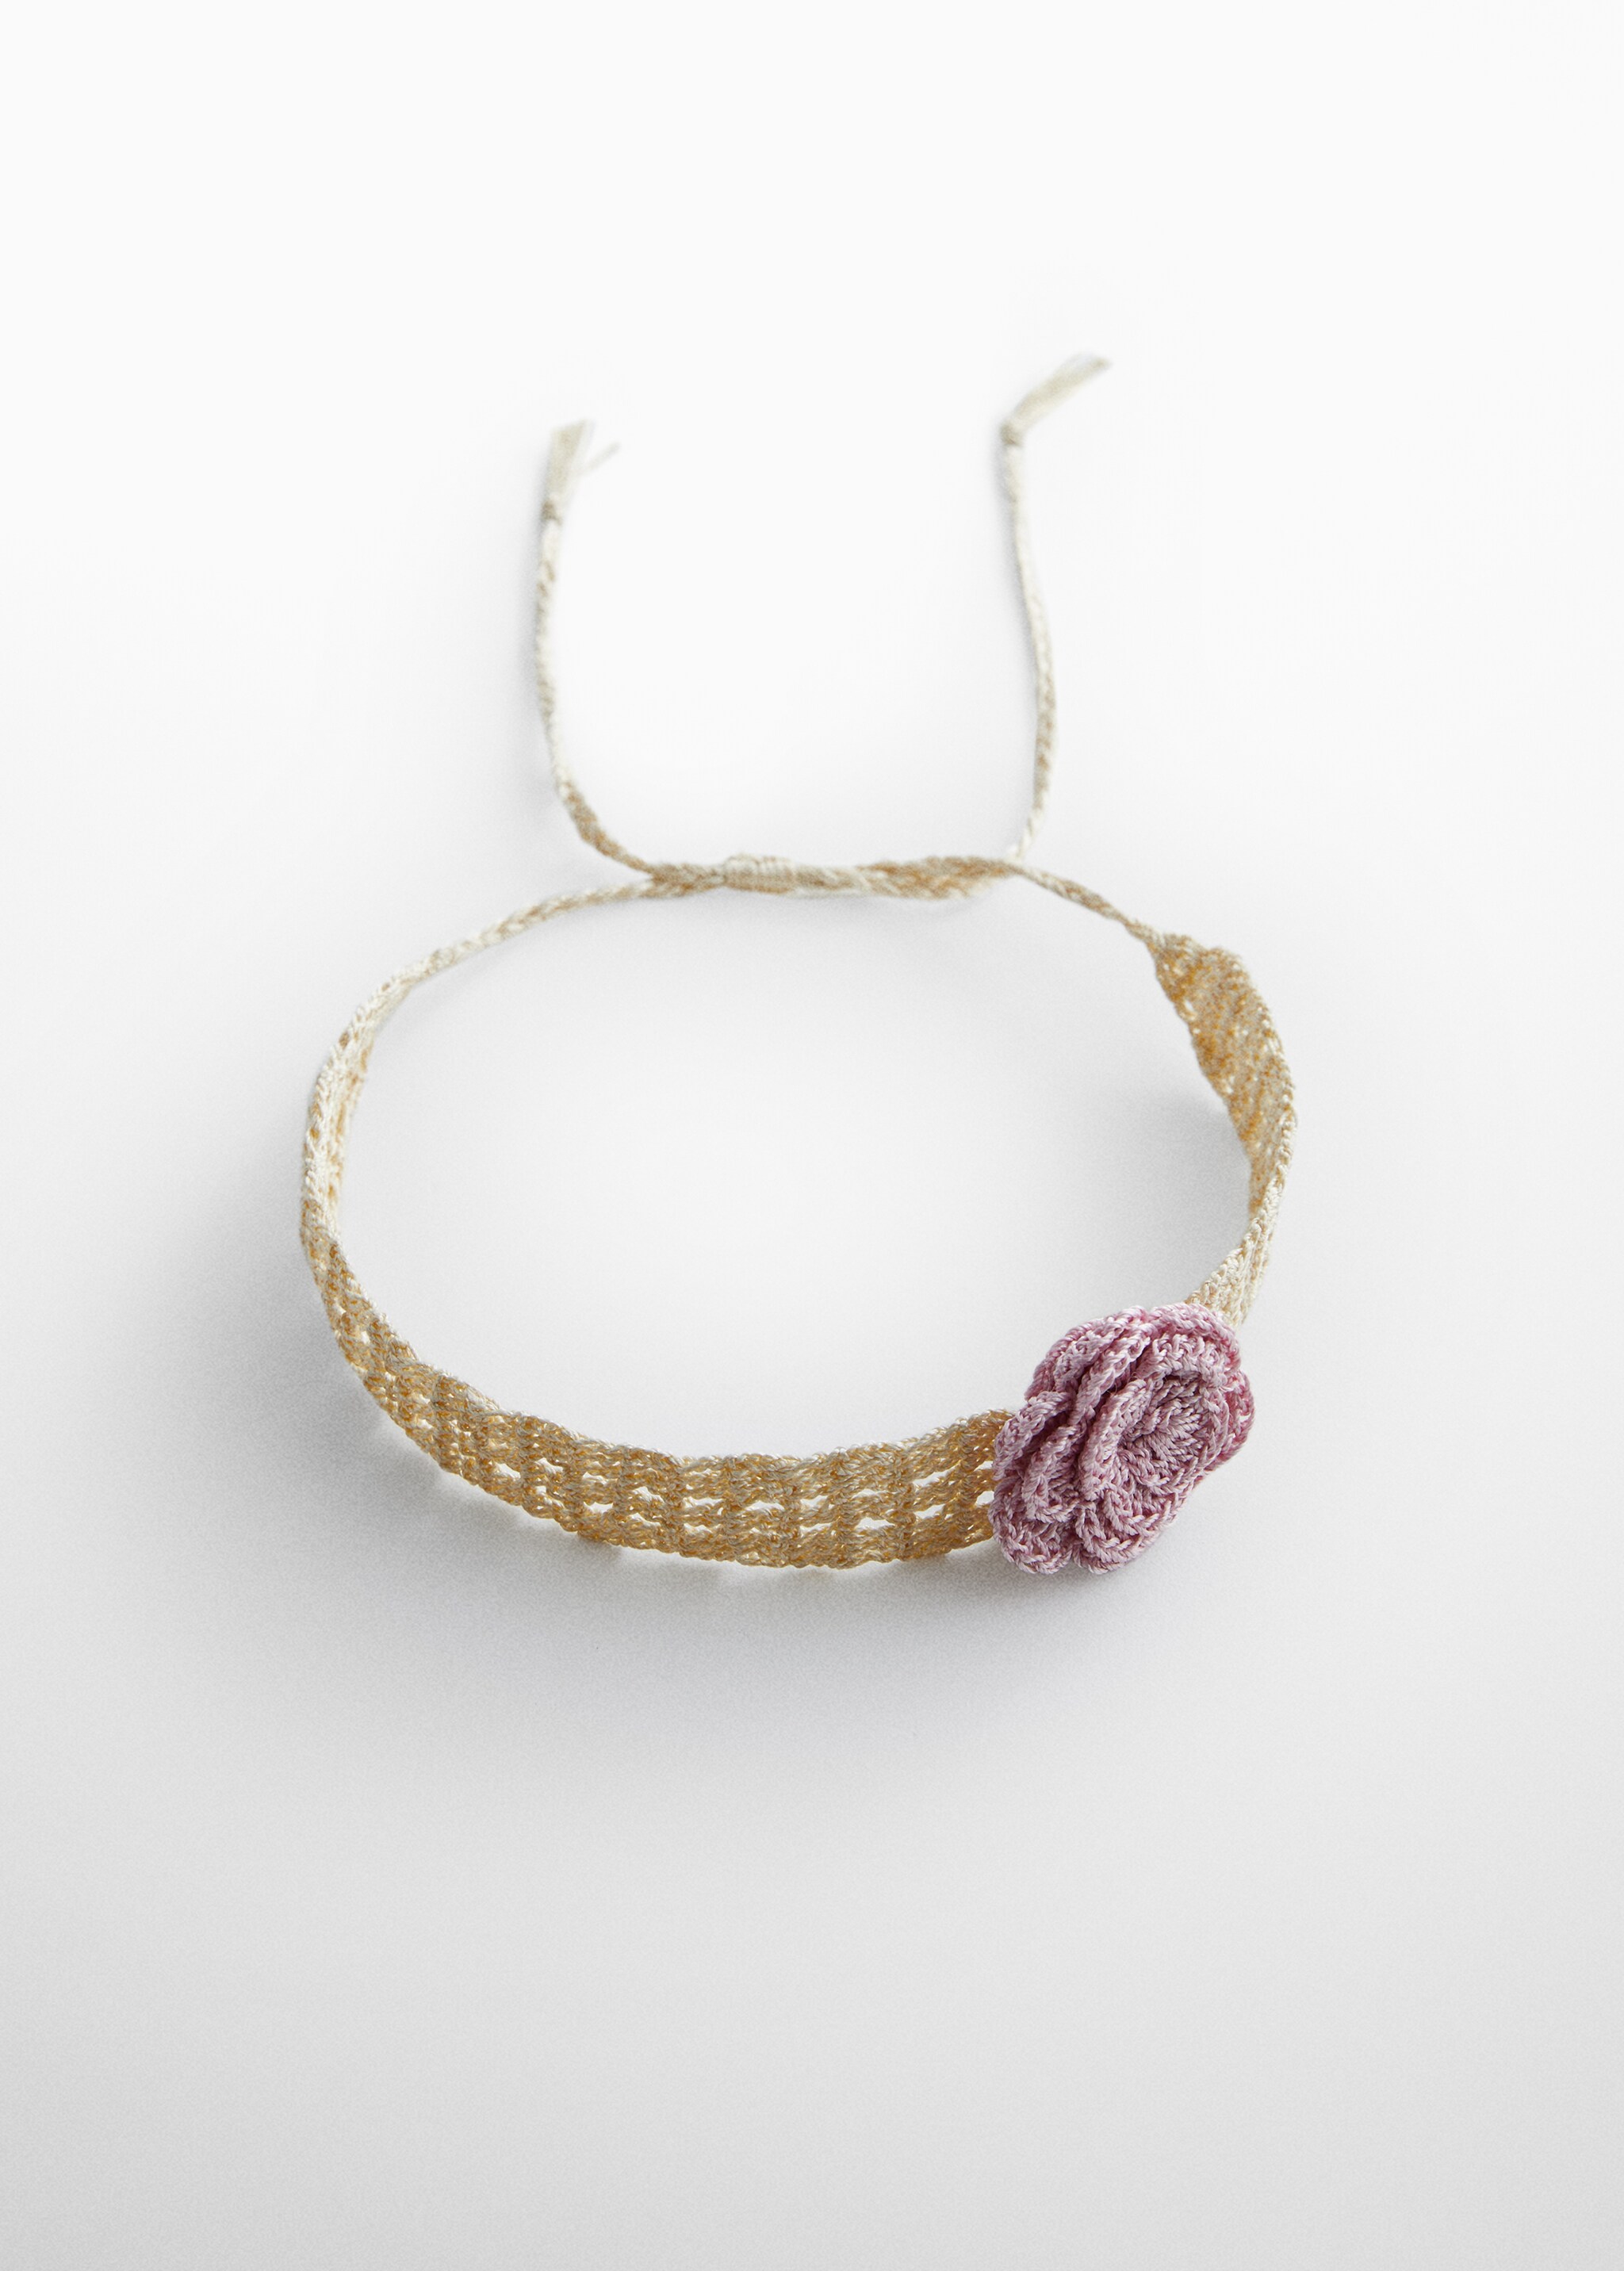 Crochet flower necklace - Article without model